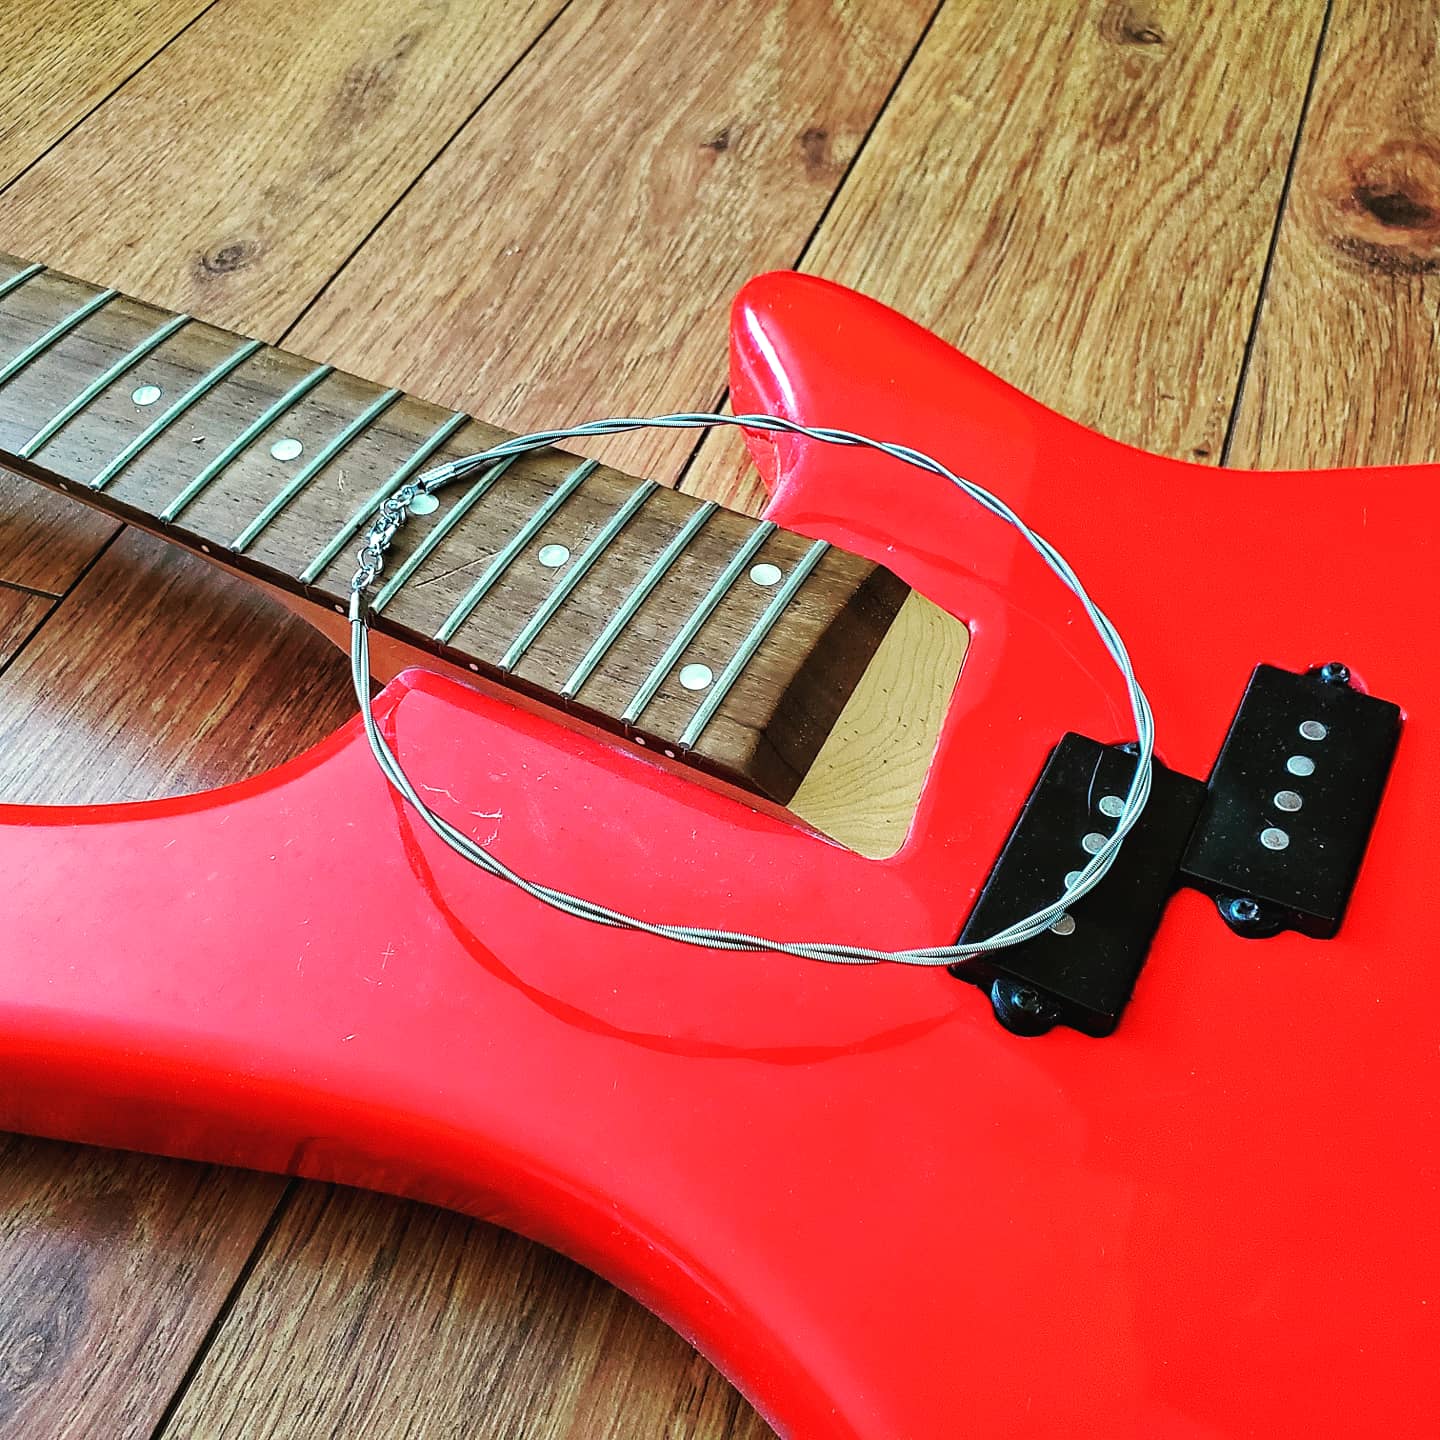 silver coloured bass guitar string necklace lying on a red bass guitar which does not have any strings